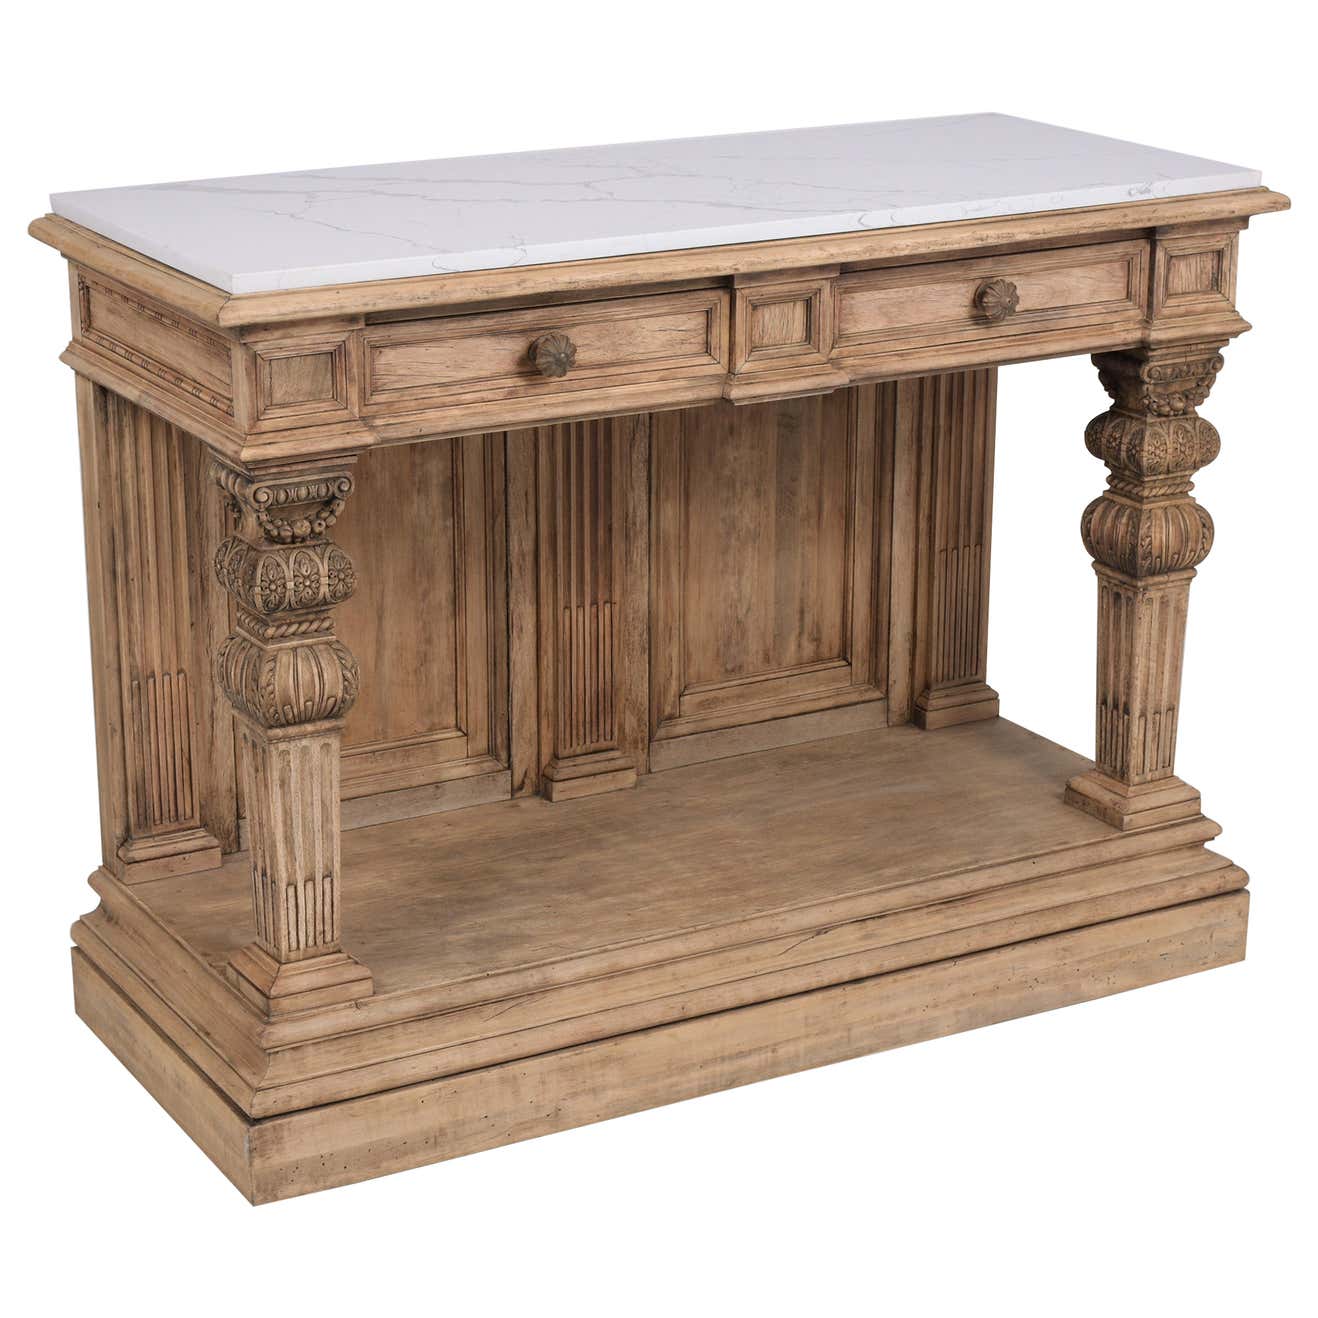 1880s Antique Baroque Carved Walnut Console with White Marble Top